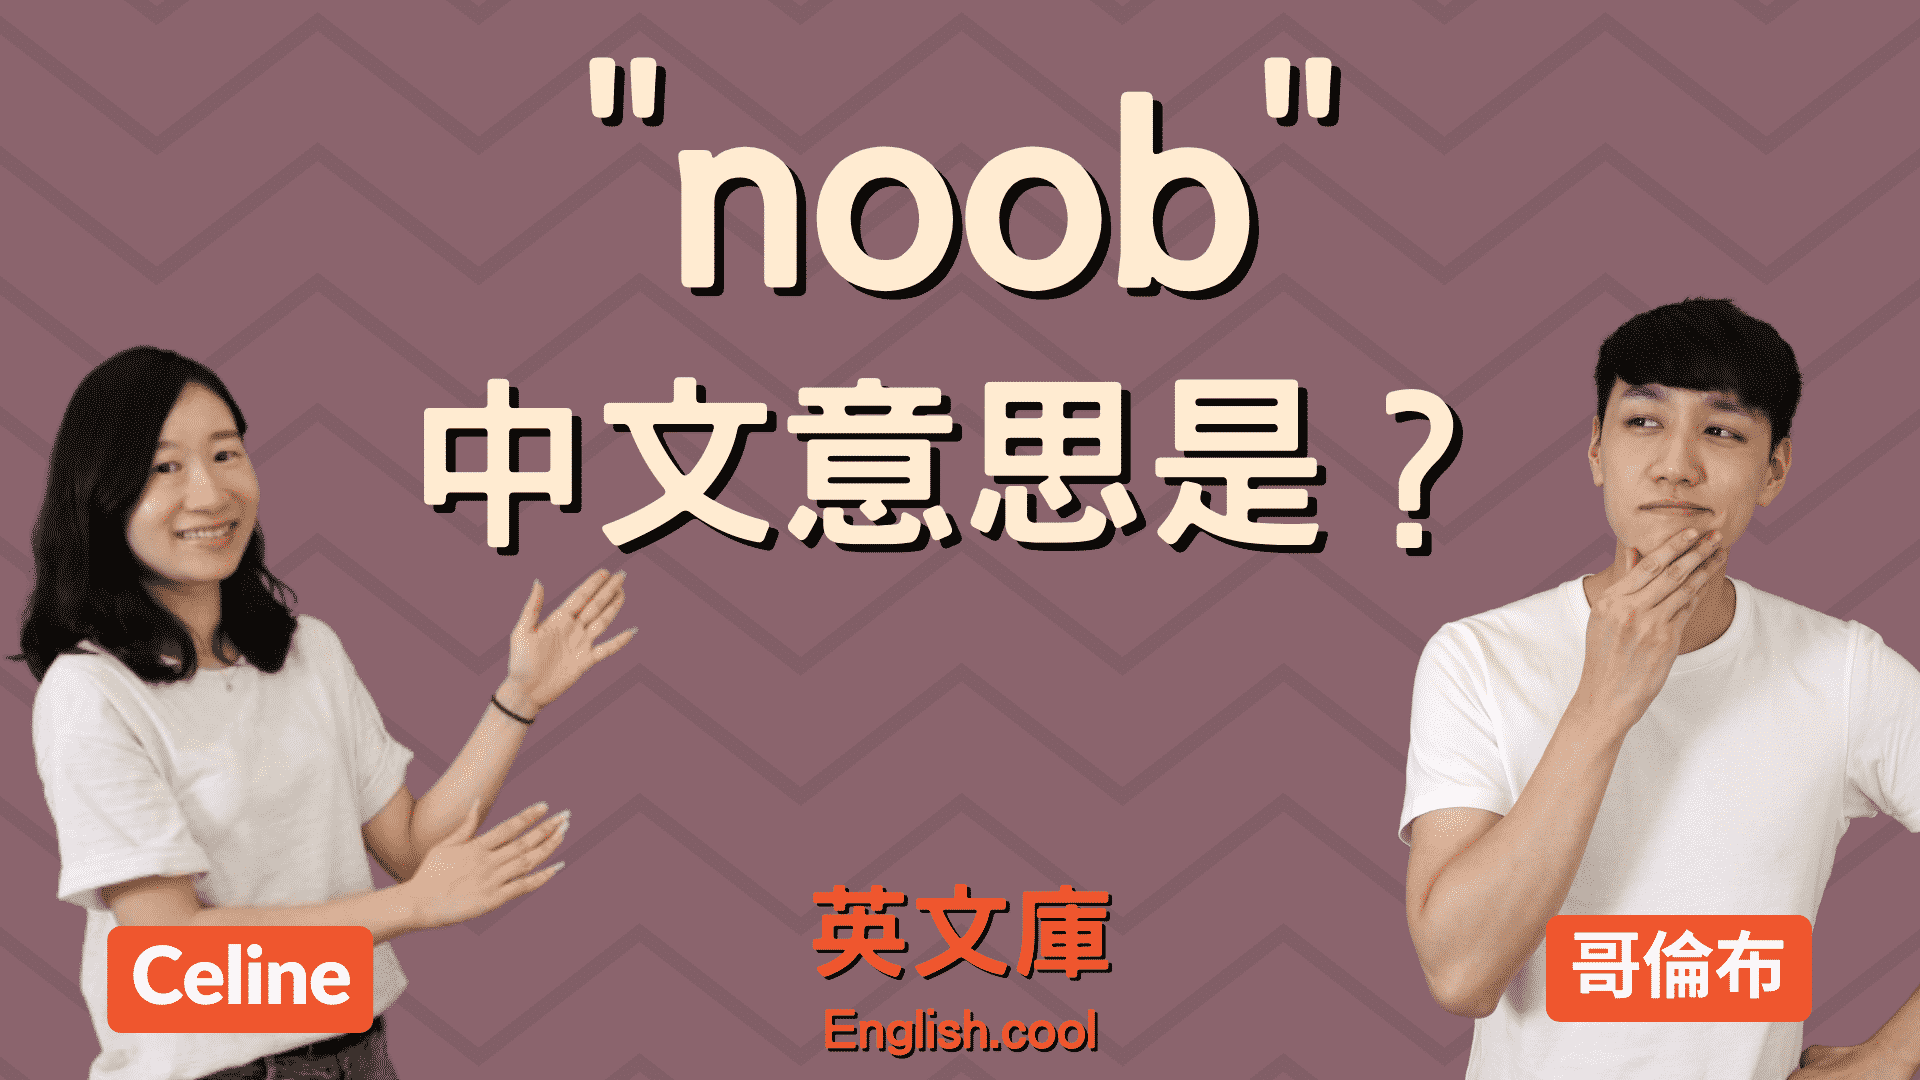 You are currently viewing 遊戲用詞「noob / n00b」是什麼意思？哪裡來的？